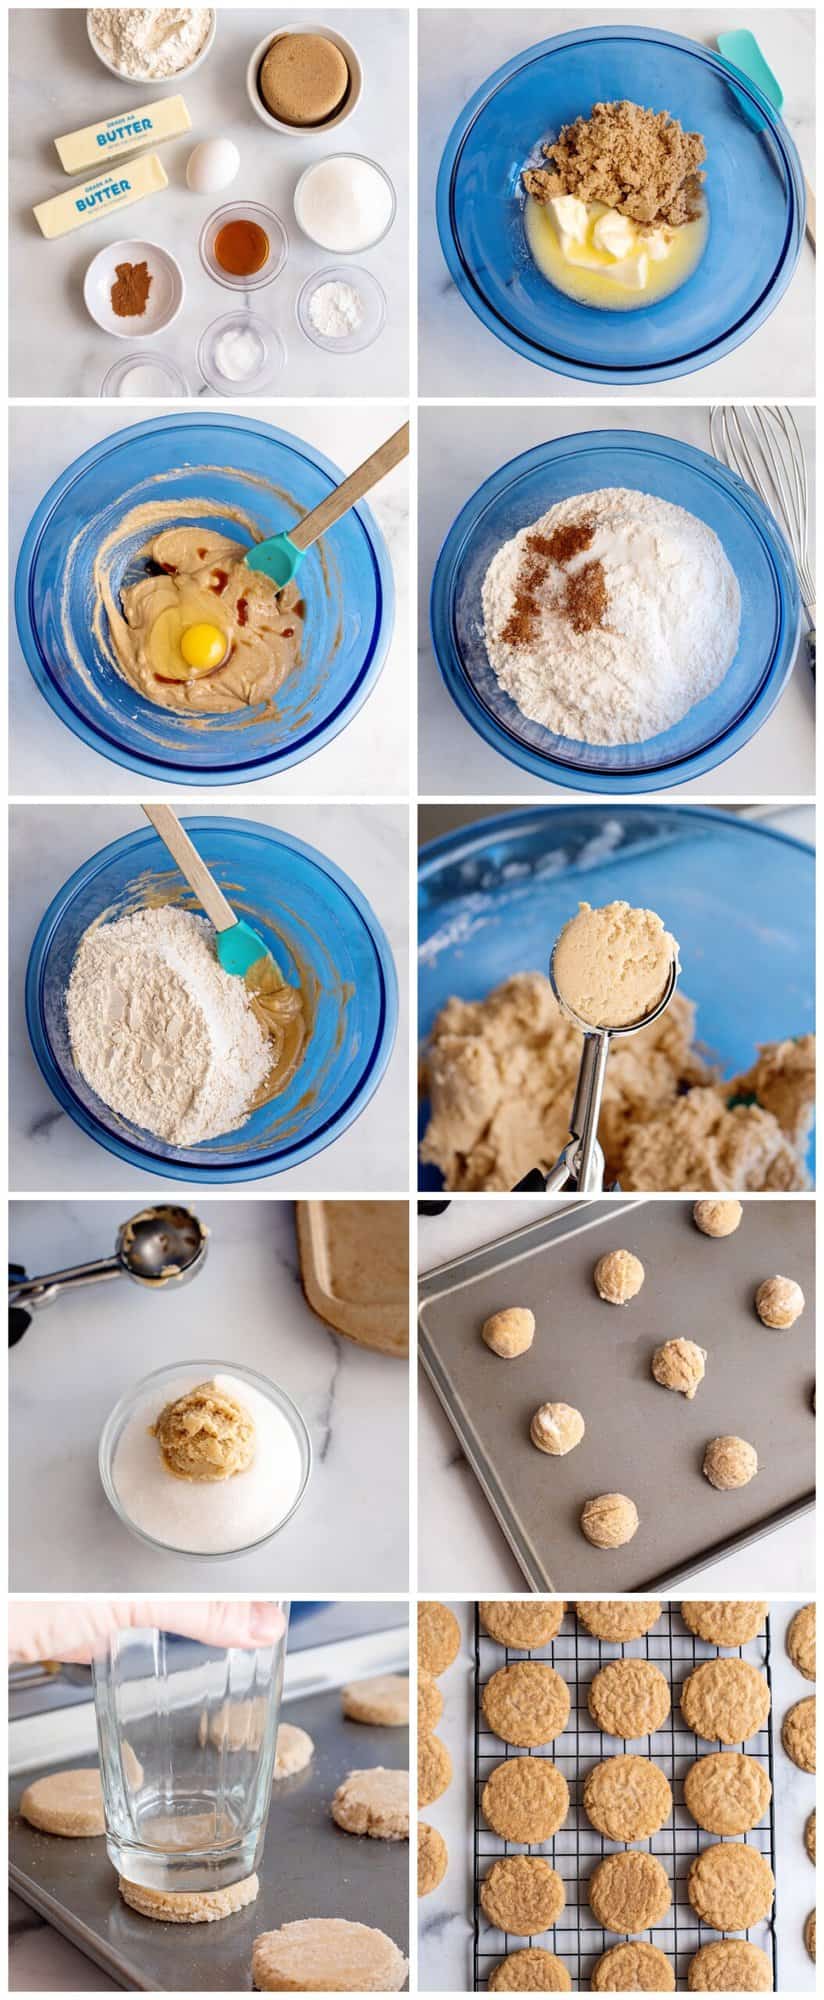 how to make brown sugar cookies step by step photo instructions